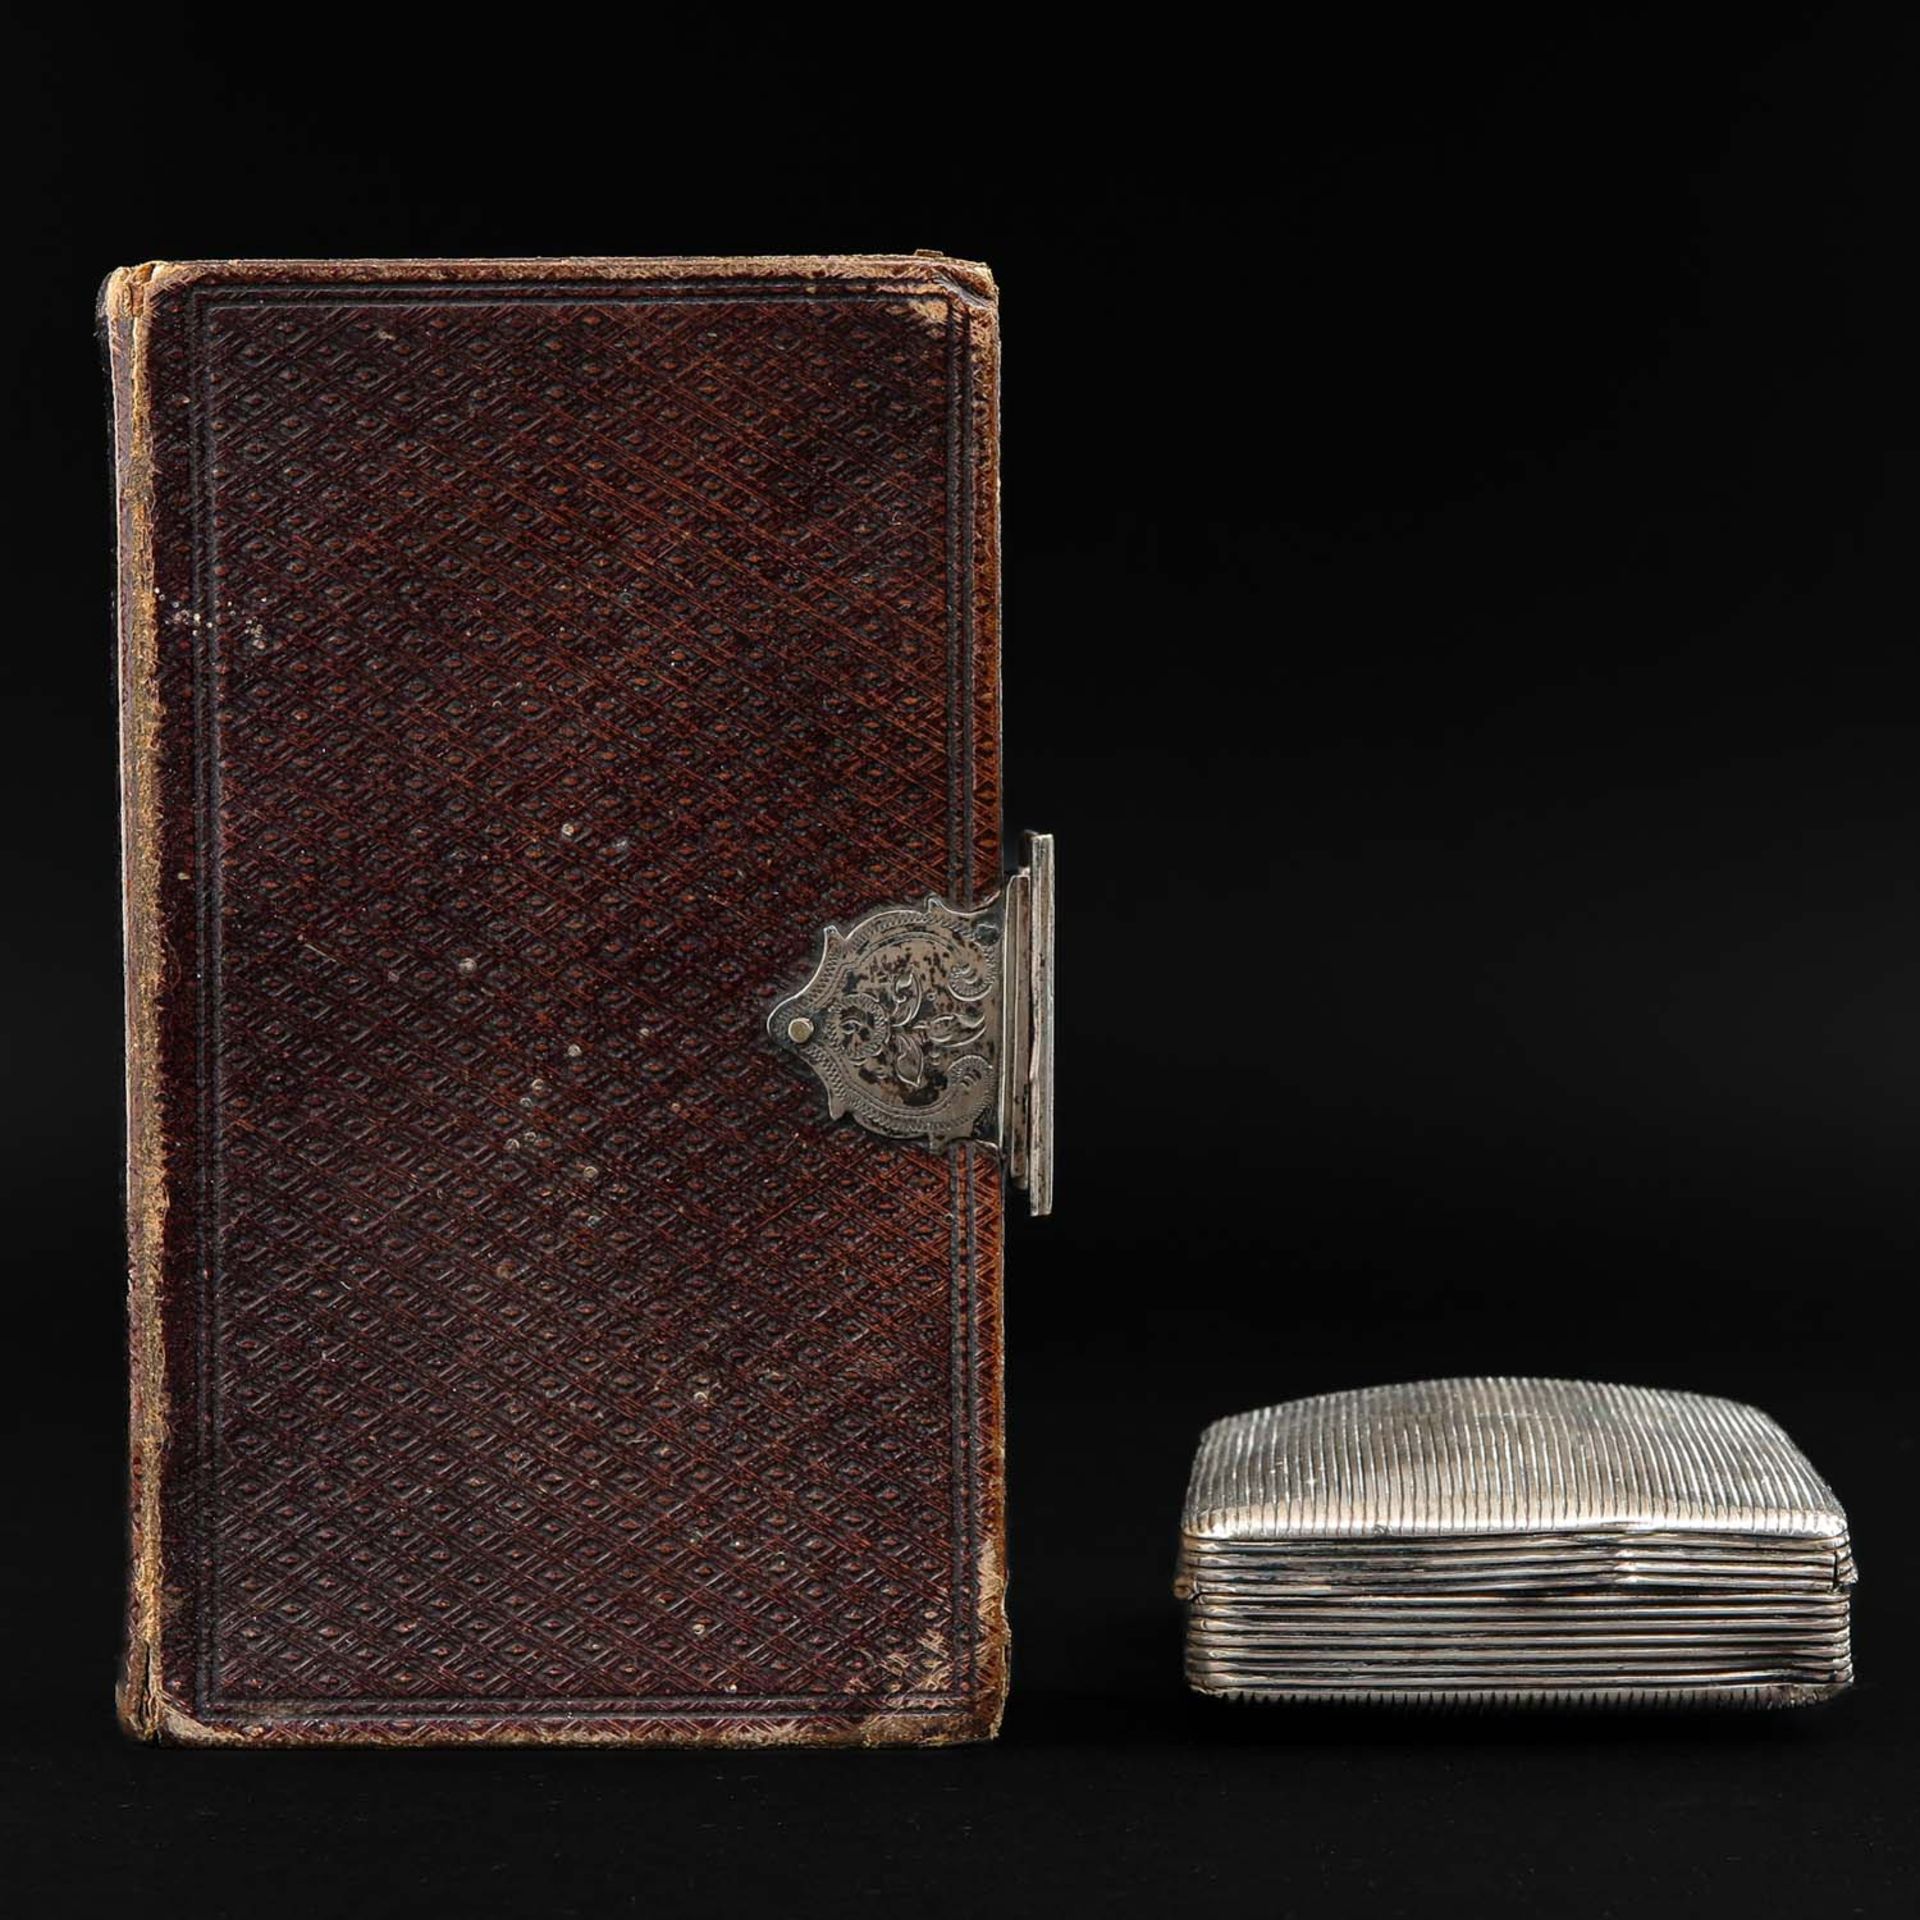 A Bible with Silver Clasp and Silver Tobacco Box - Image 4 of 10